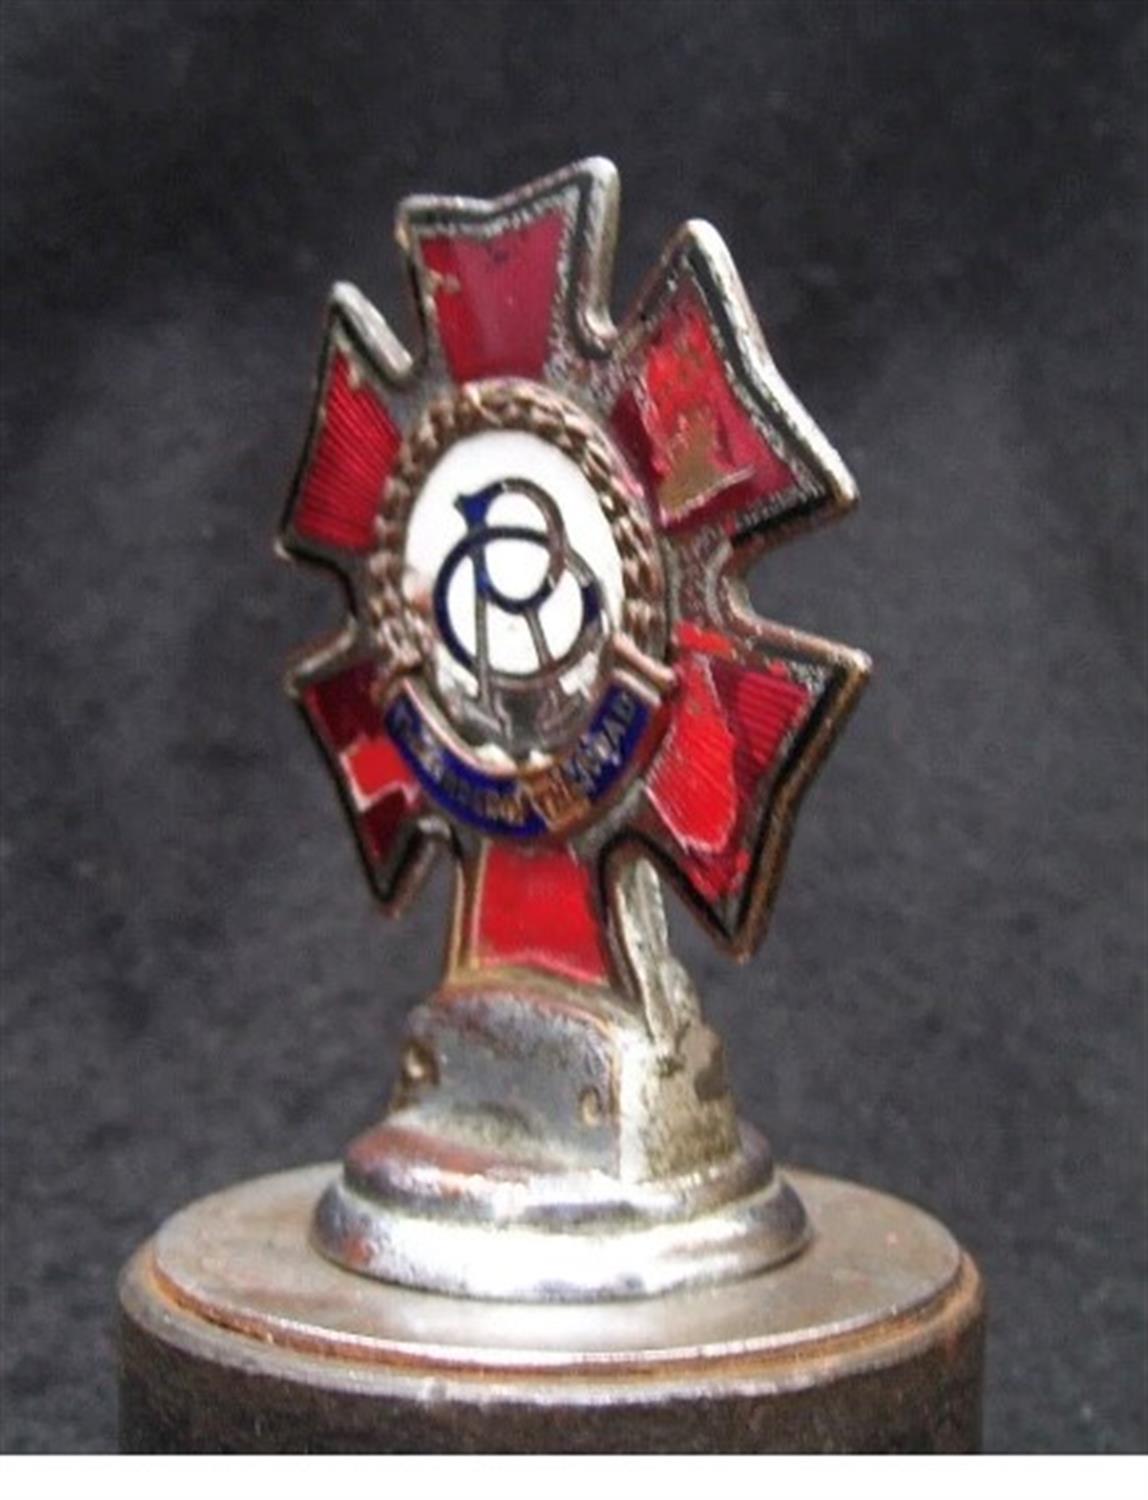 A Very Rare Enamelled "Order of the Road" Radiator Grille Mascot Car Badge - Image 2 of 4